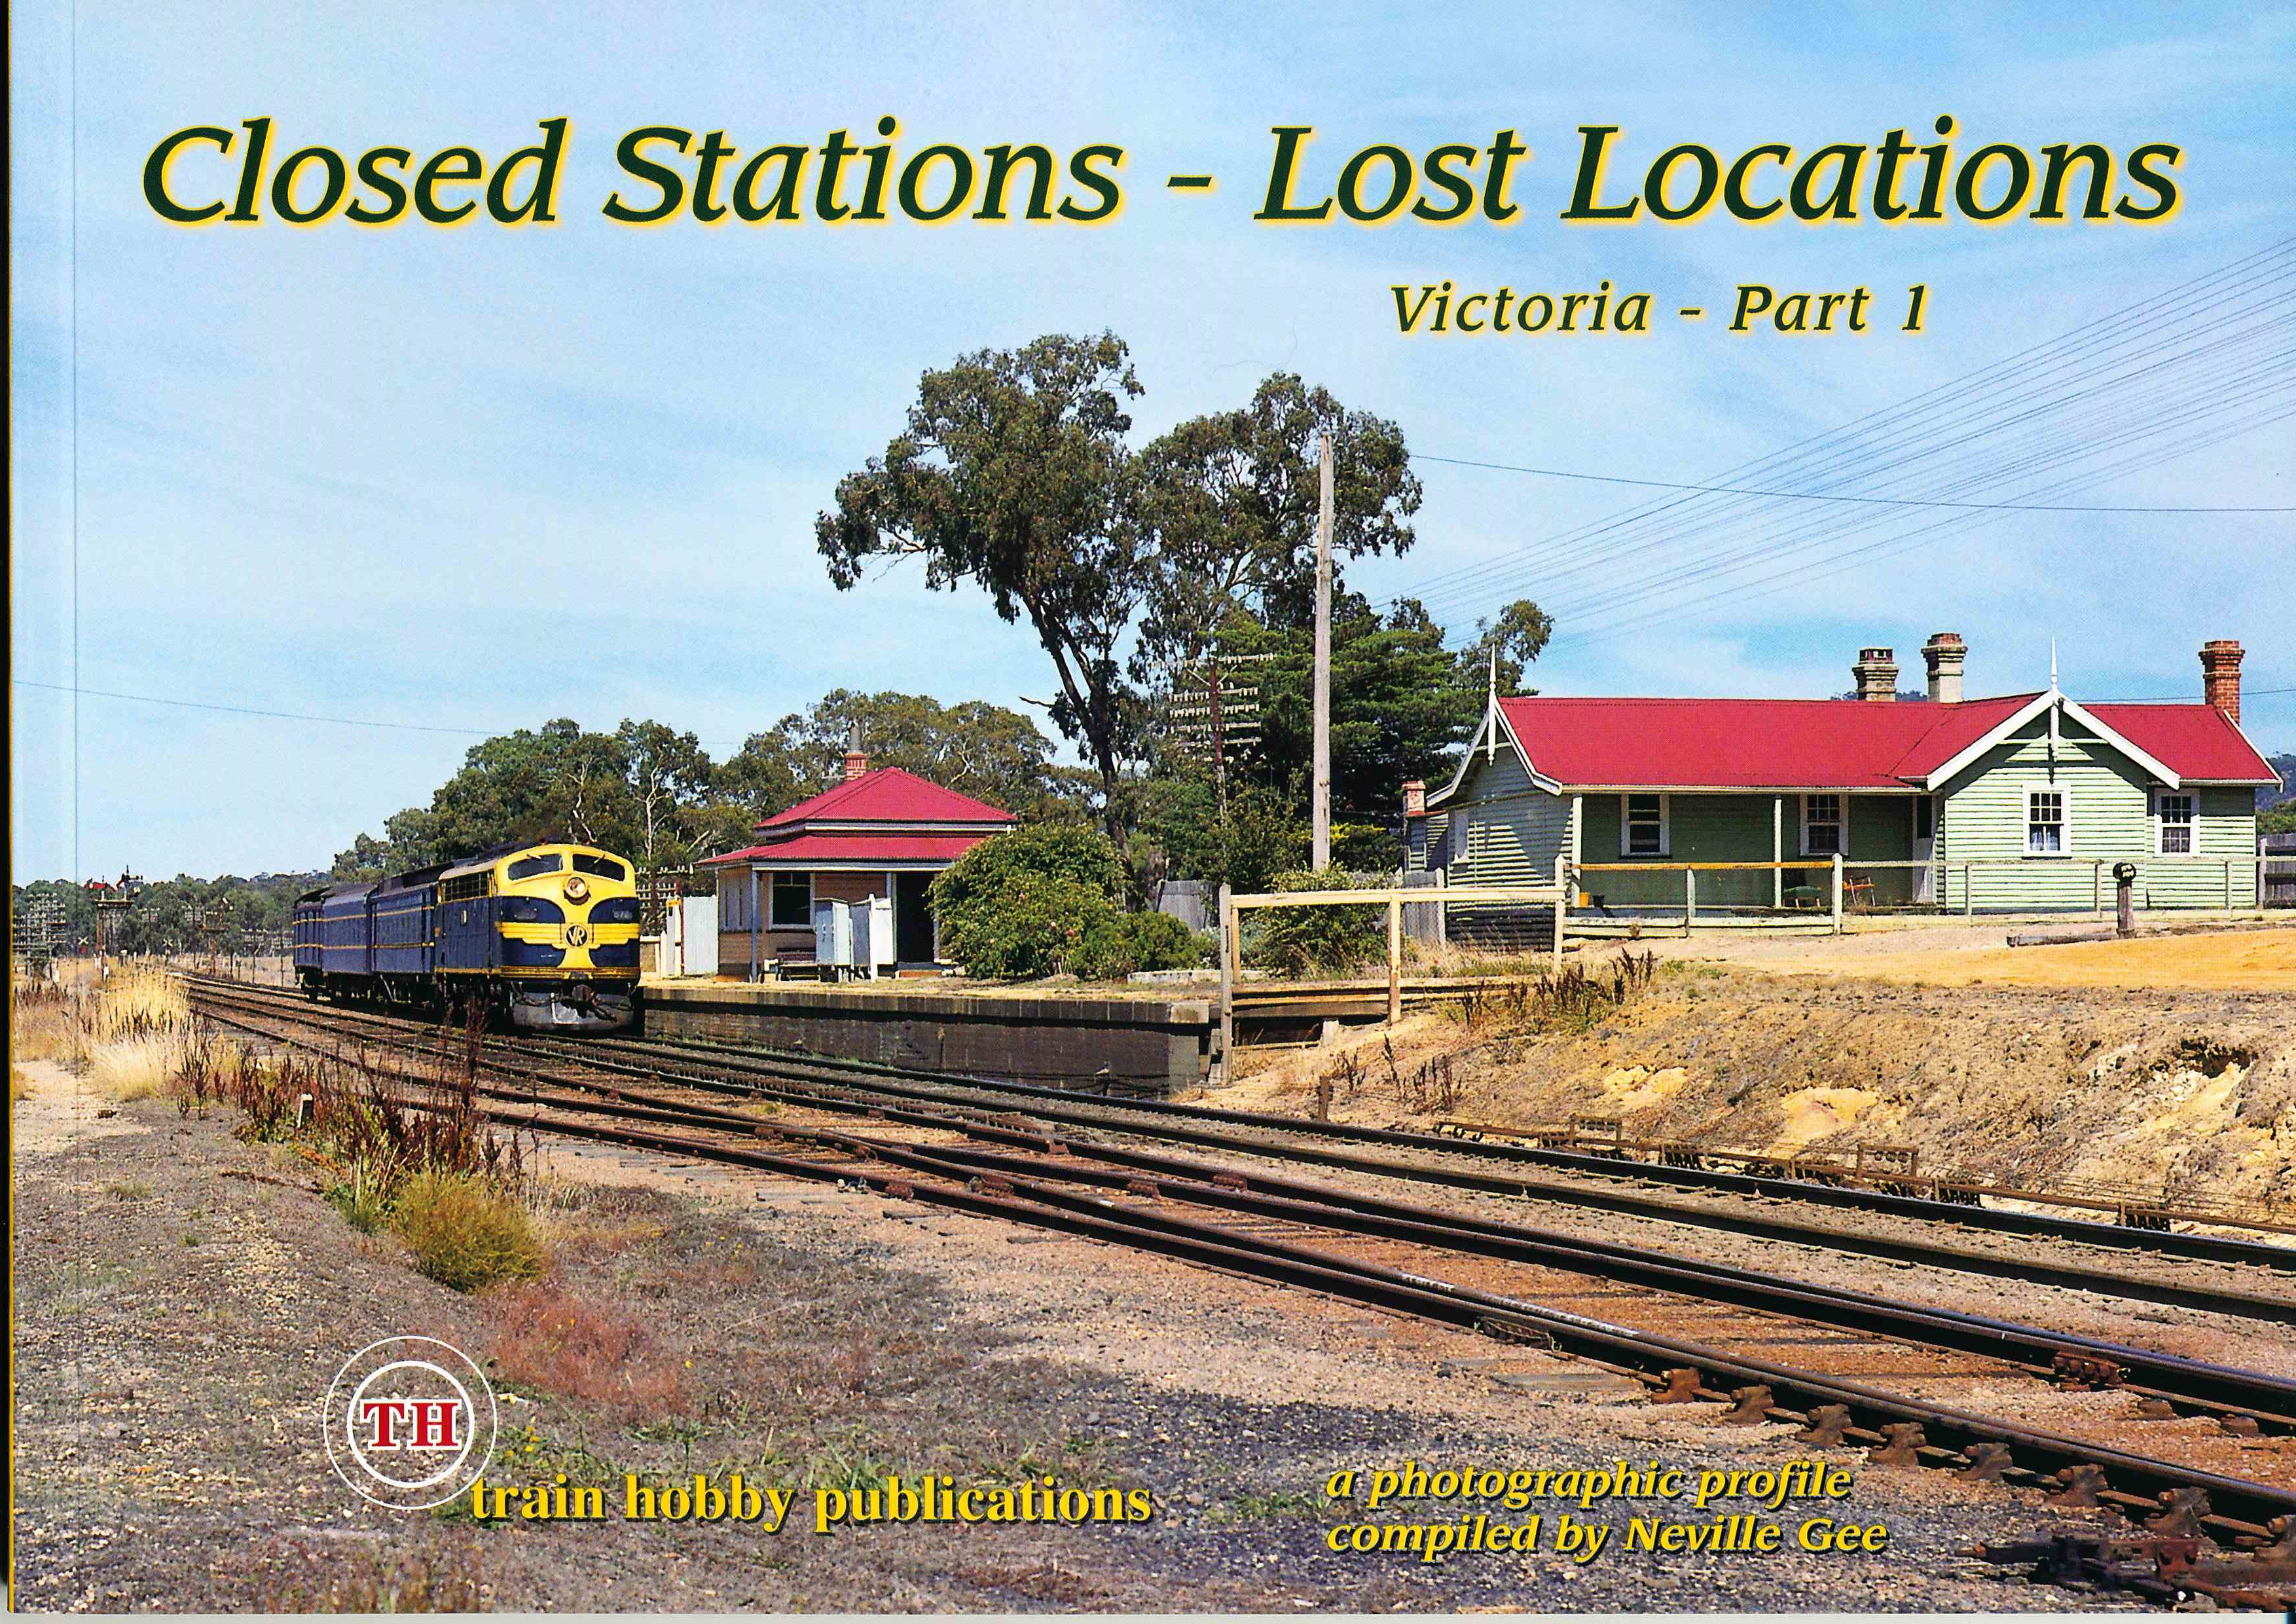 Closed Stations - Lost Locations: Victoria - Part 1